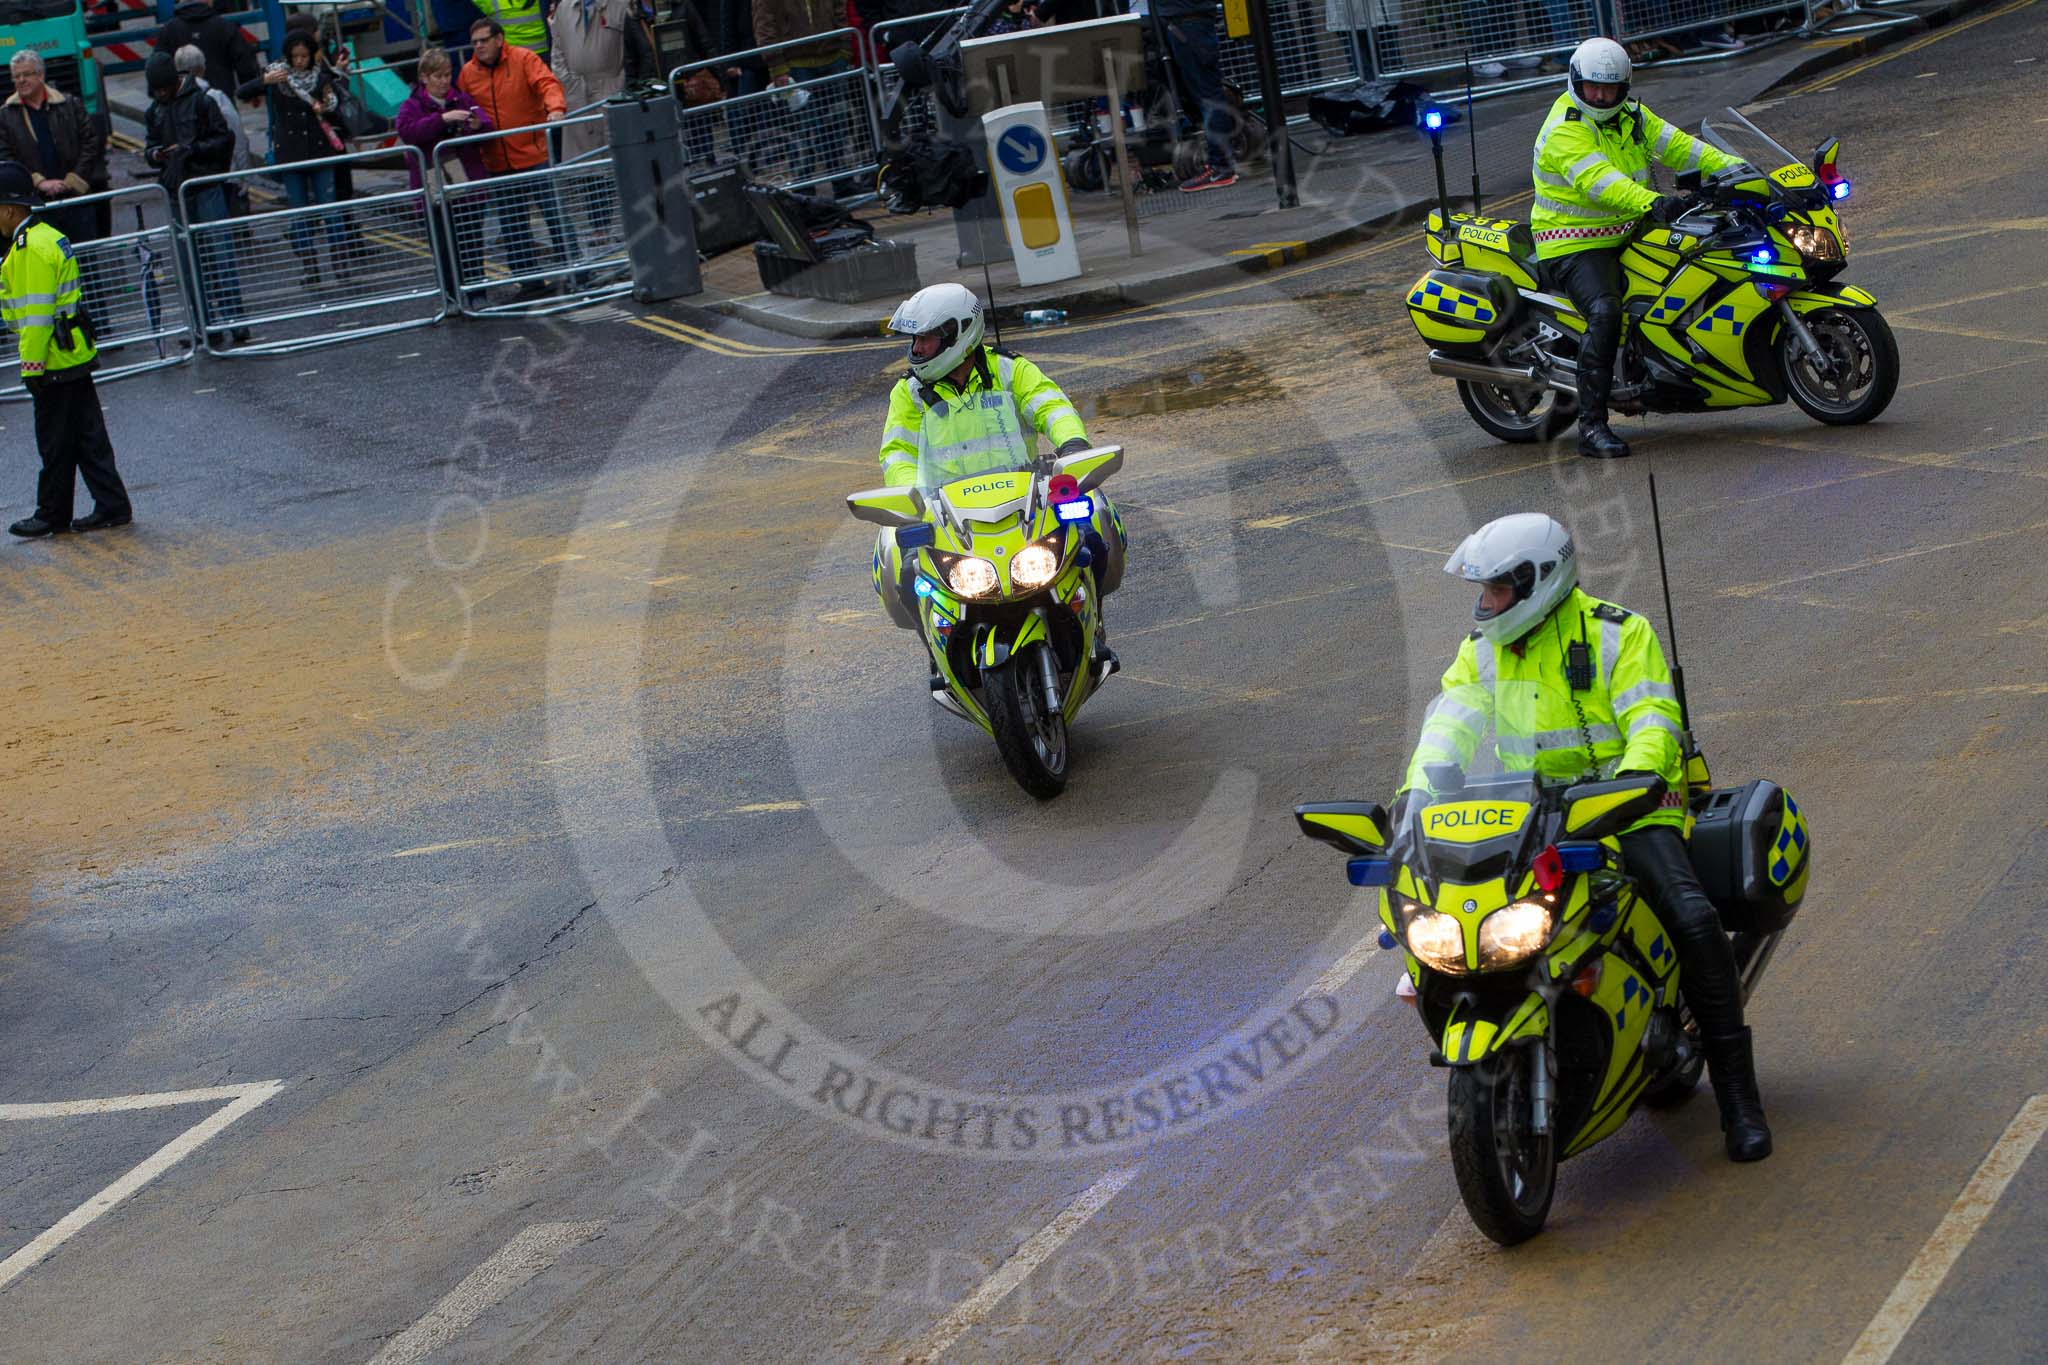 Lord Mayor's Show 2012: Metropolitan Police officers on motorbikes after the 2012 Lord Mayor's Show..
Press stand opposite Mansion House, City of London,
London,
Greater London,
United Kingdom,
on 10 November 2012 at 12:15, image #1956